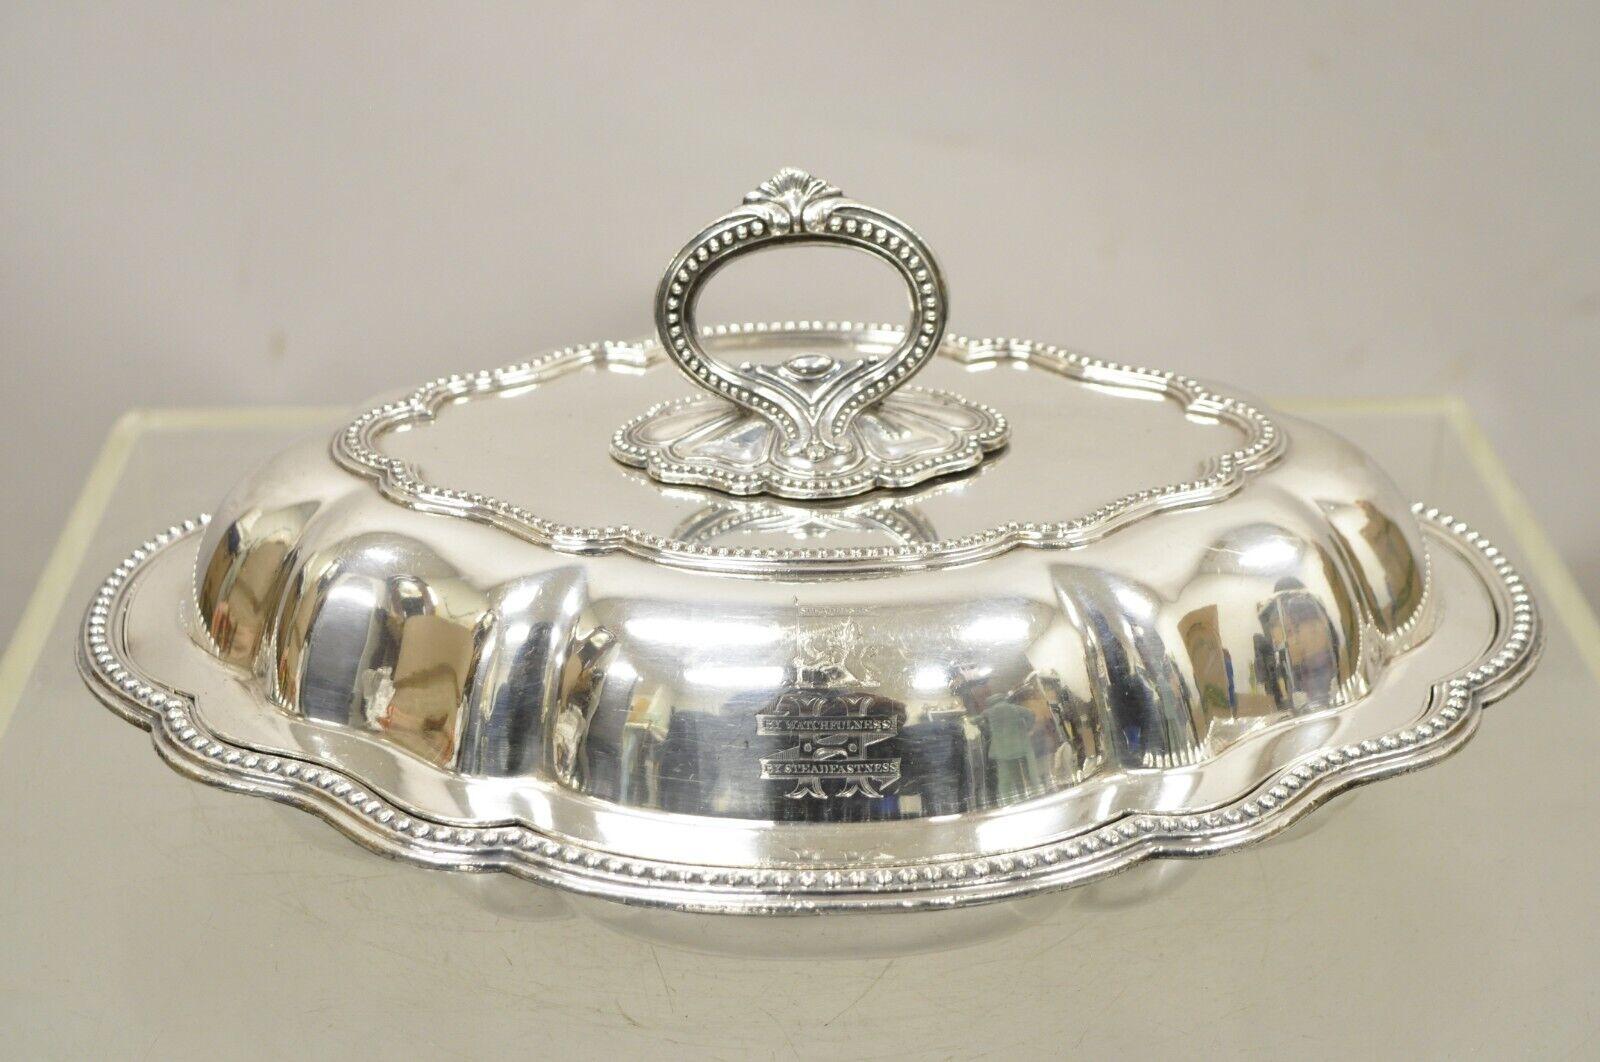 Vintage Silver Plated English Victorian Style Lidded Vegetable Serving Platter. Item features an ornate Removable Handle, Scalloped Edge, “H and Lion Engraved Monogram”, Original Hallmark, Quality English Craftsmanship. Circa Early To Mid 20th